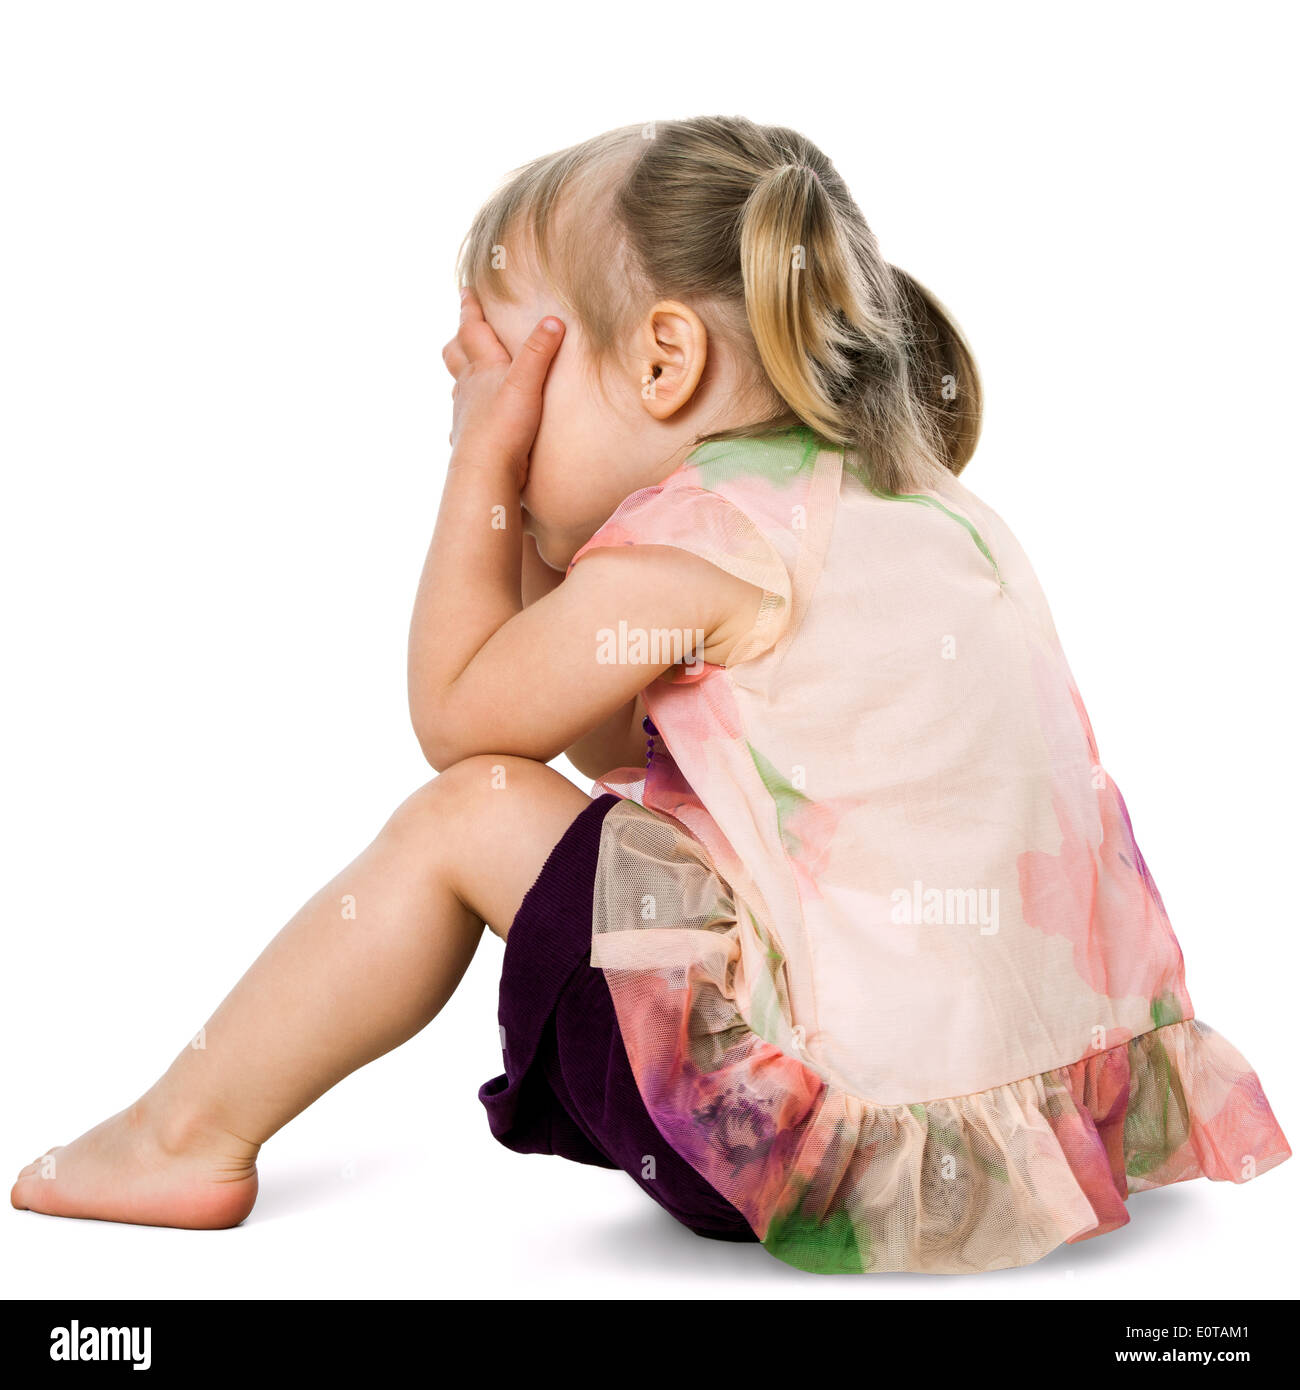 Portrait of upset little girl hiding face behind hands.Isolated on white. Stock Photo